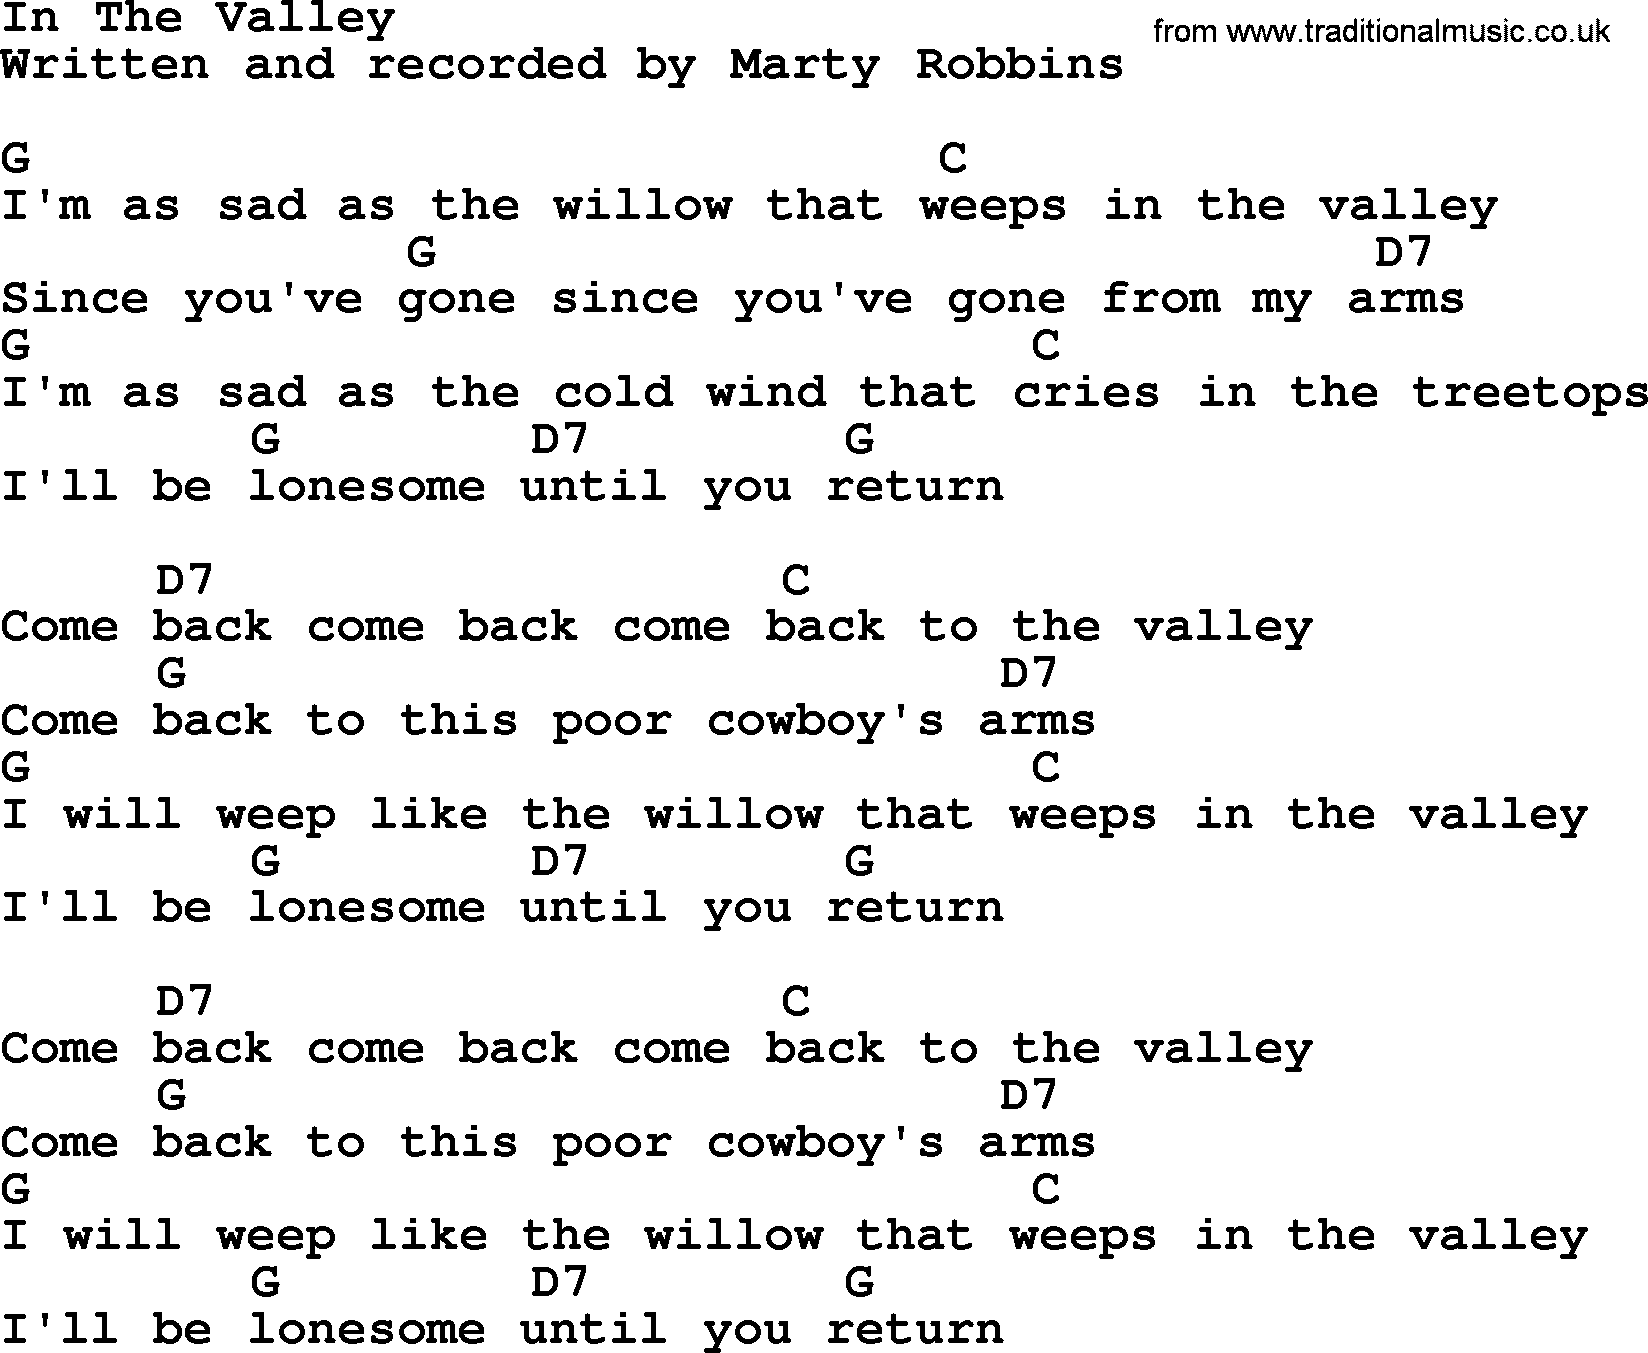 Marty Robbins song: In The Valley, lyrics and chords